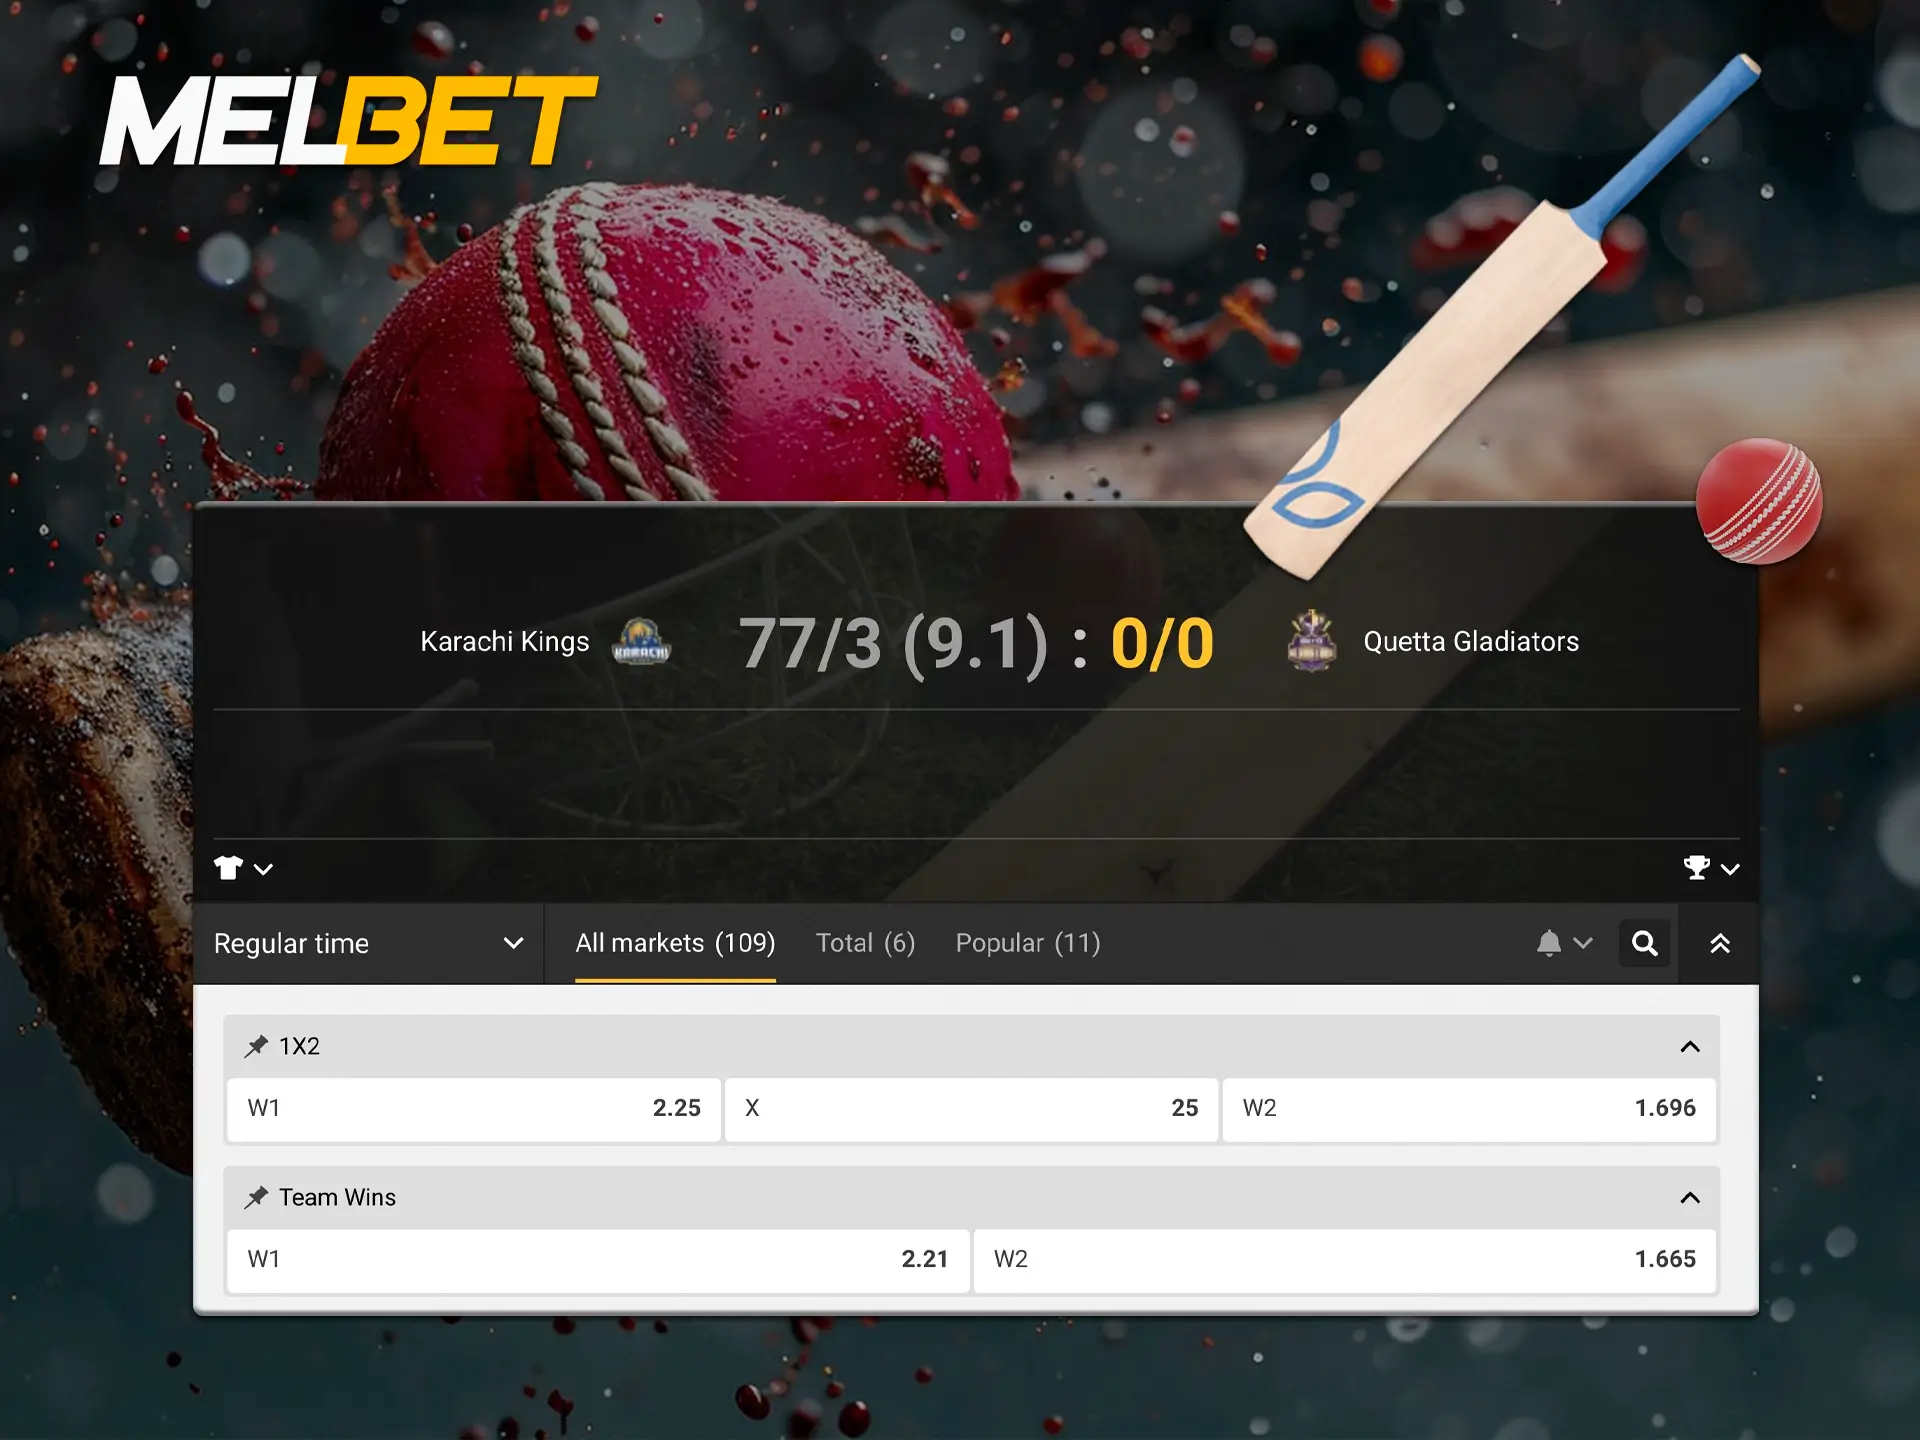 Melbet is a legal casino with high ratings and odds on everyone's favourite cricket.